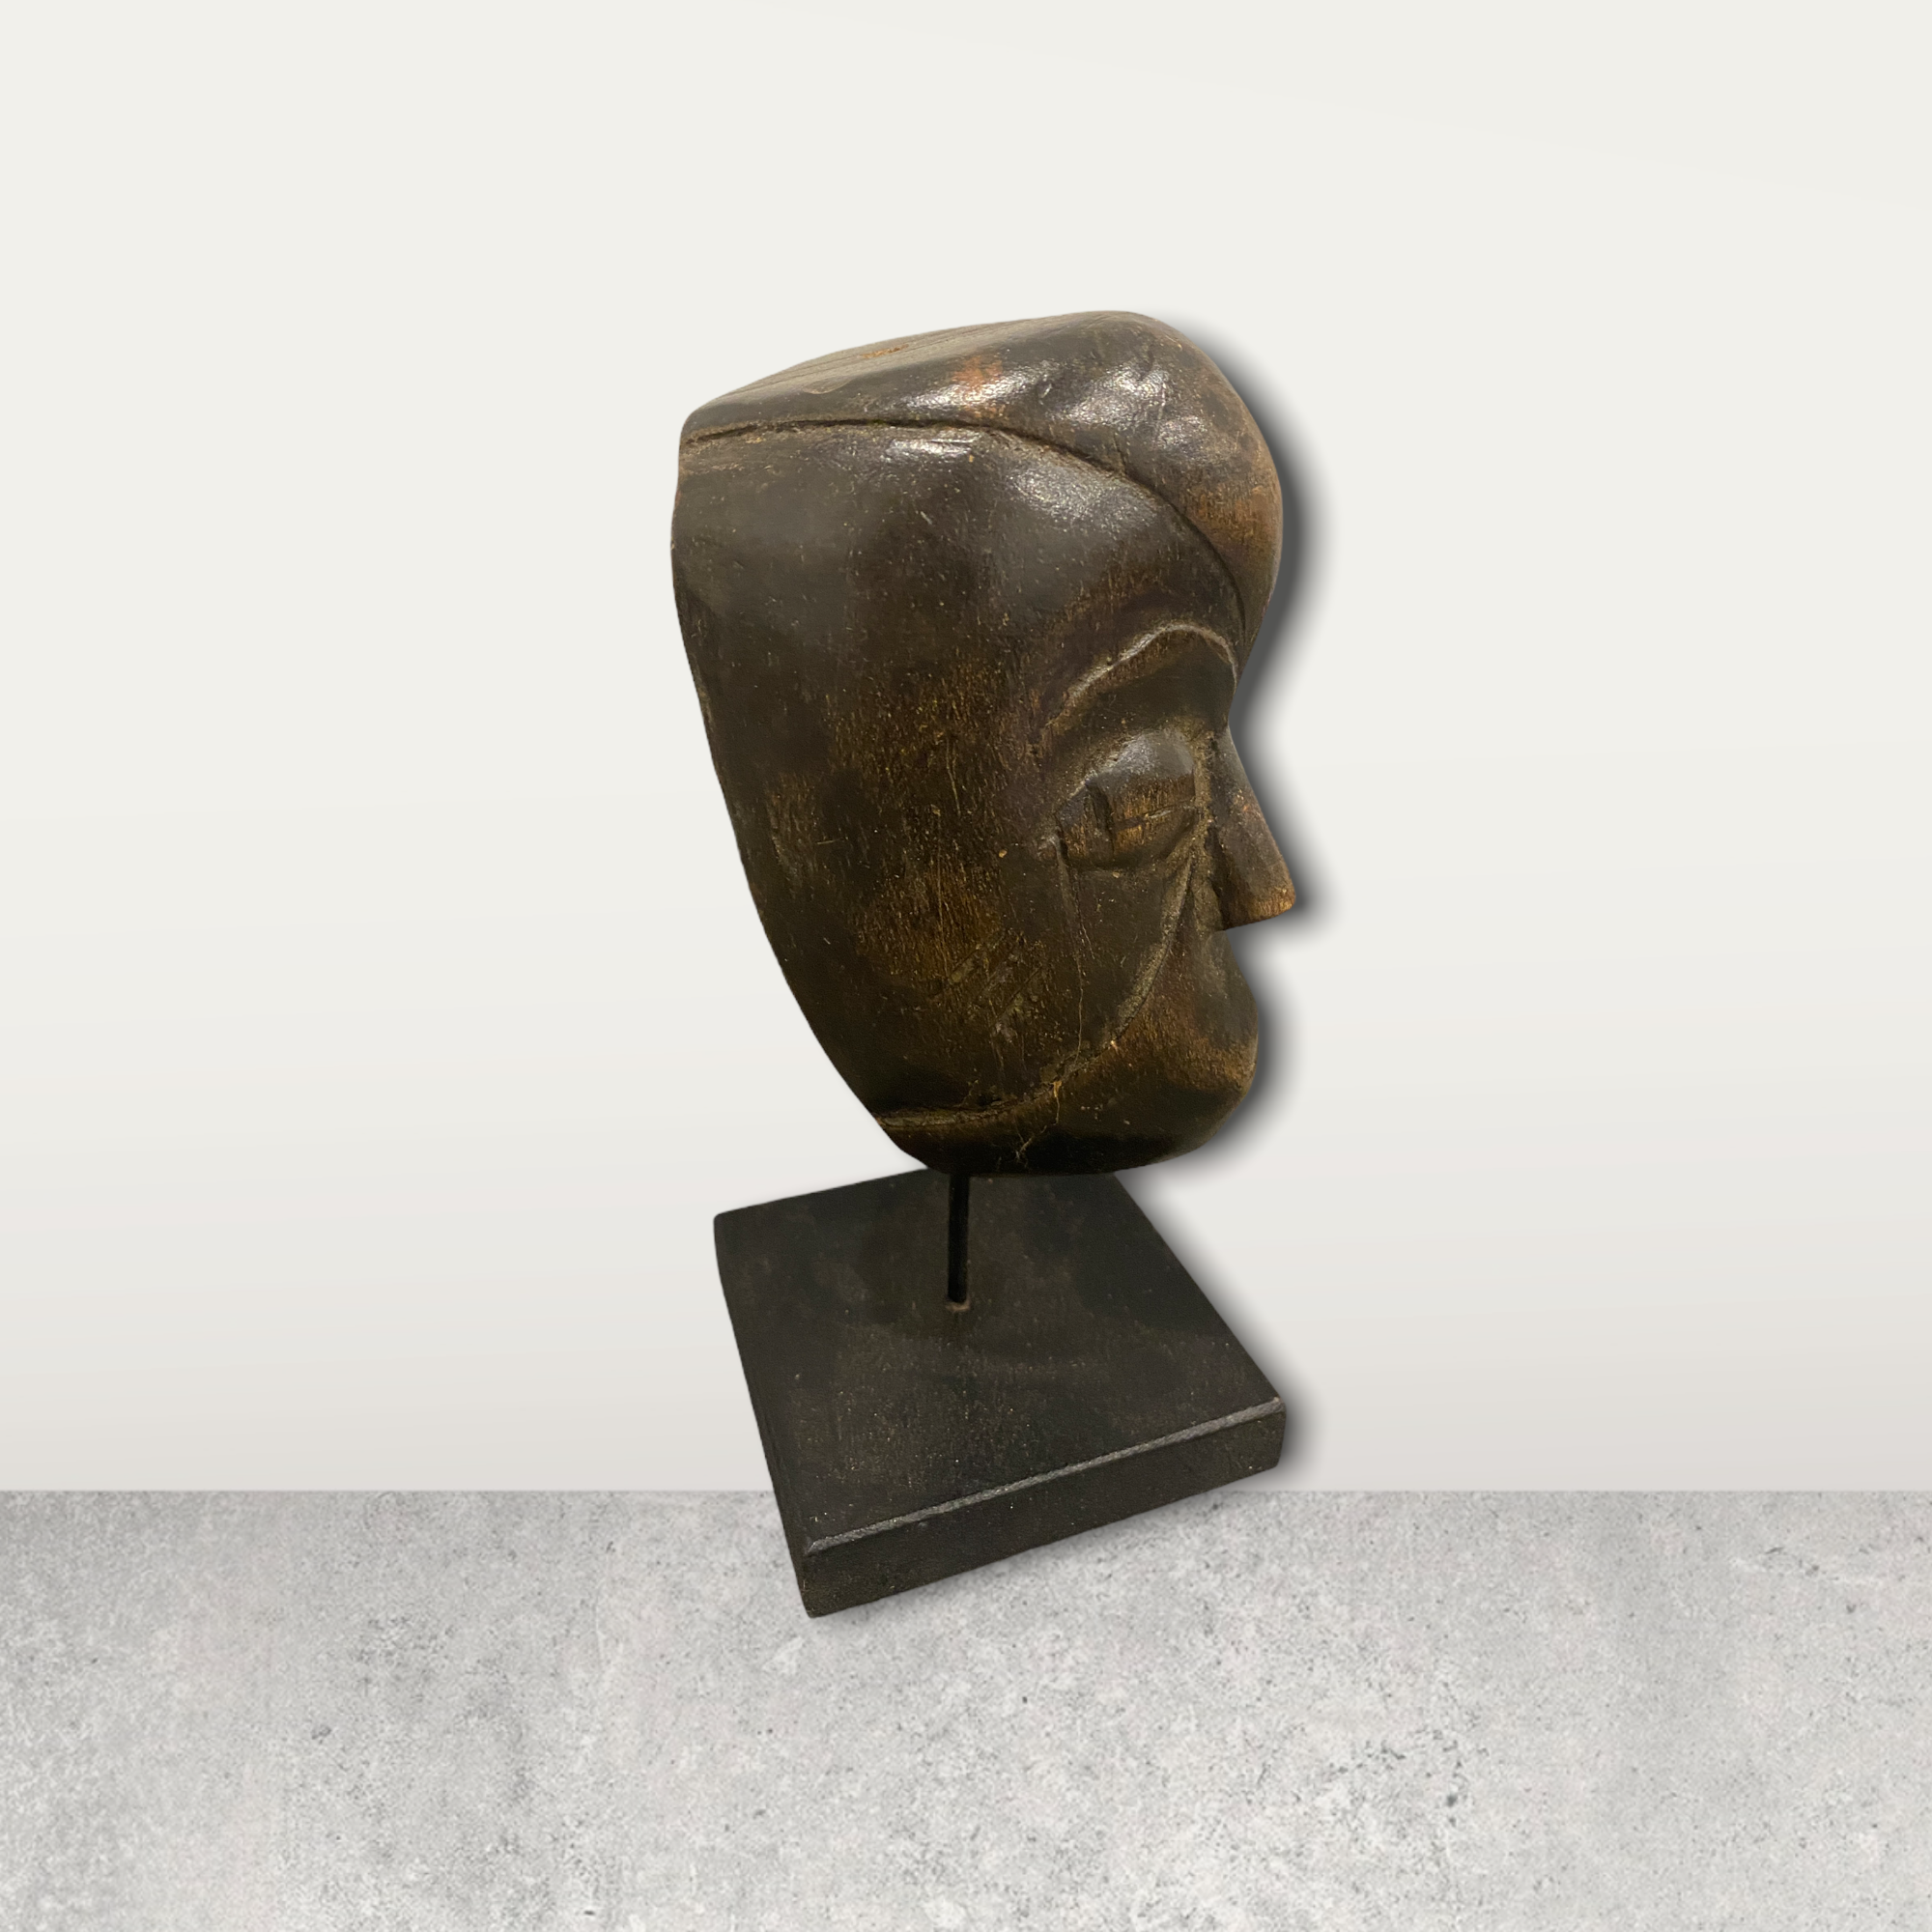 Small African mask on stand